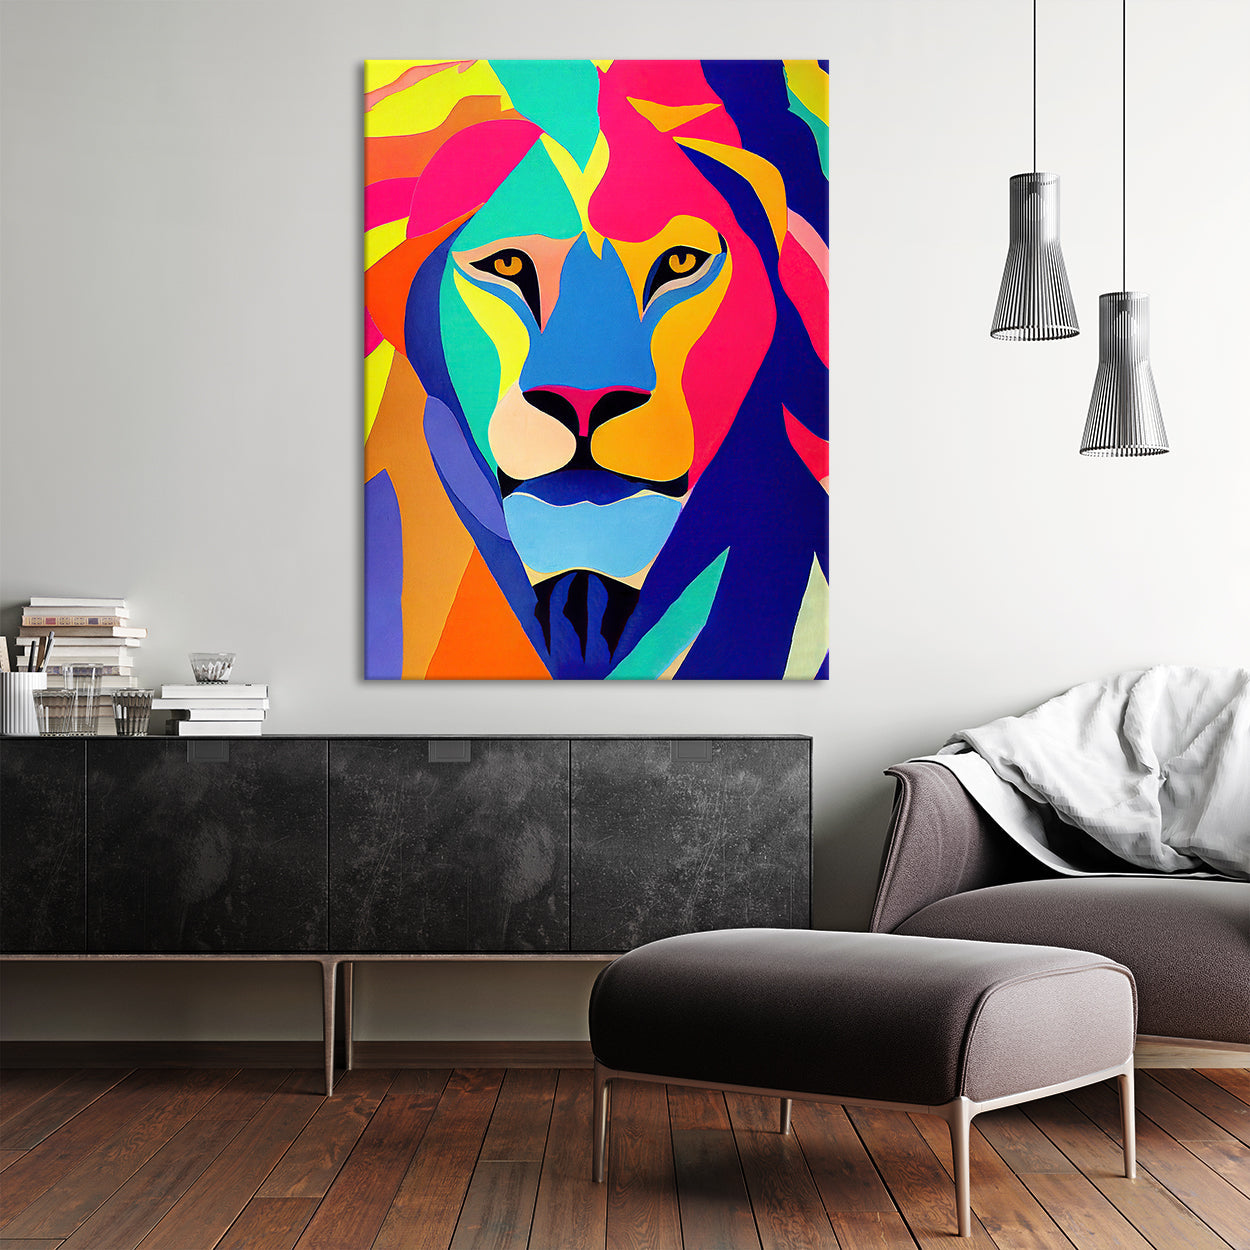 Colorful Lion Color-Changing Canvas Tote Bag - ShopZoo